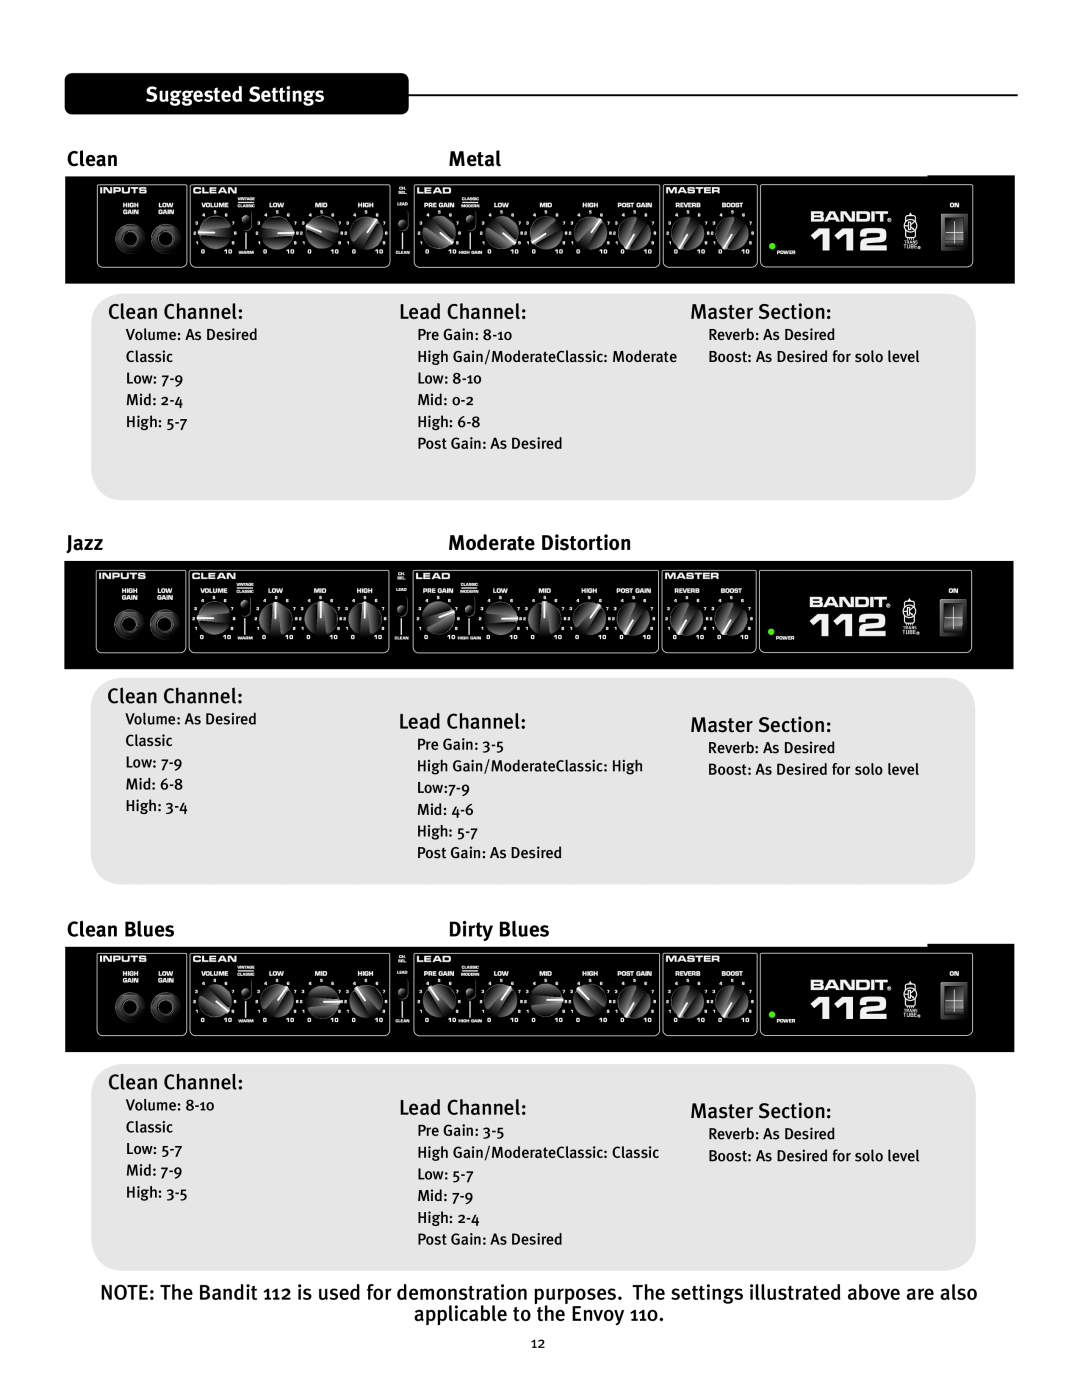 Peavey 112 Suggested Settings, Metal, Clean Channel, Lead Channel, Jazz, Clean Blues, Master Section, Dirty Blues 